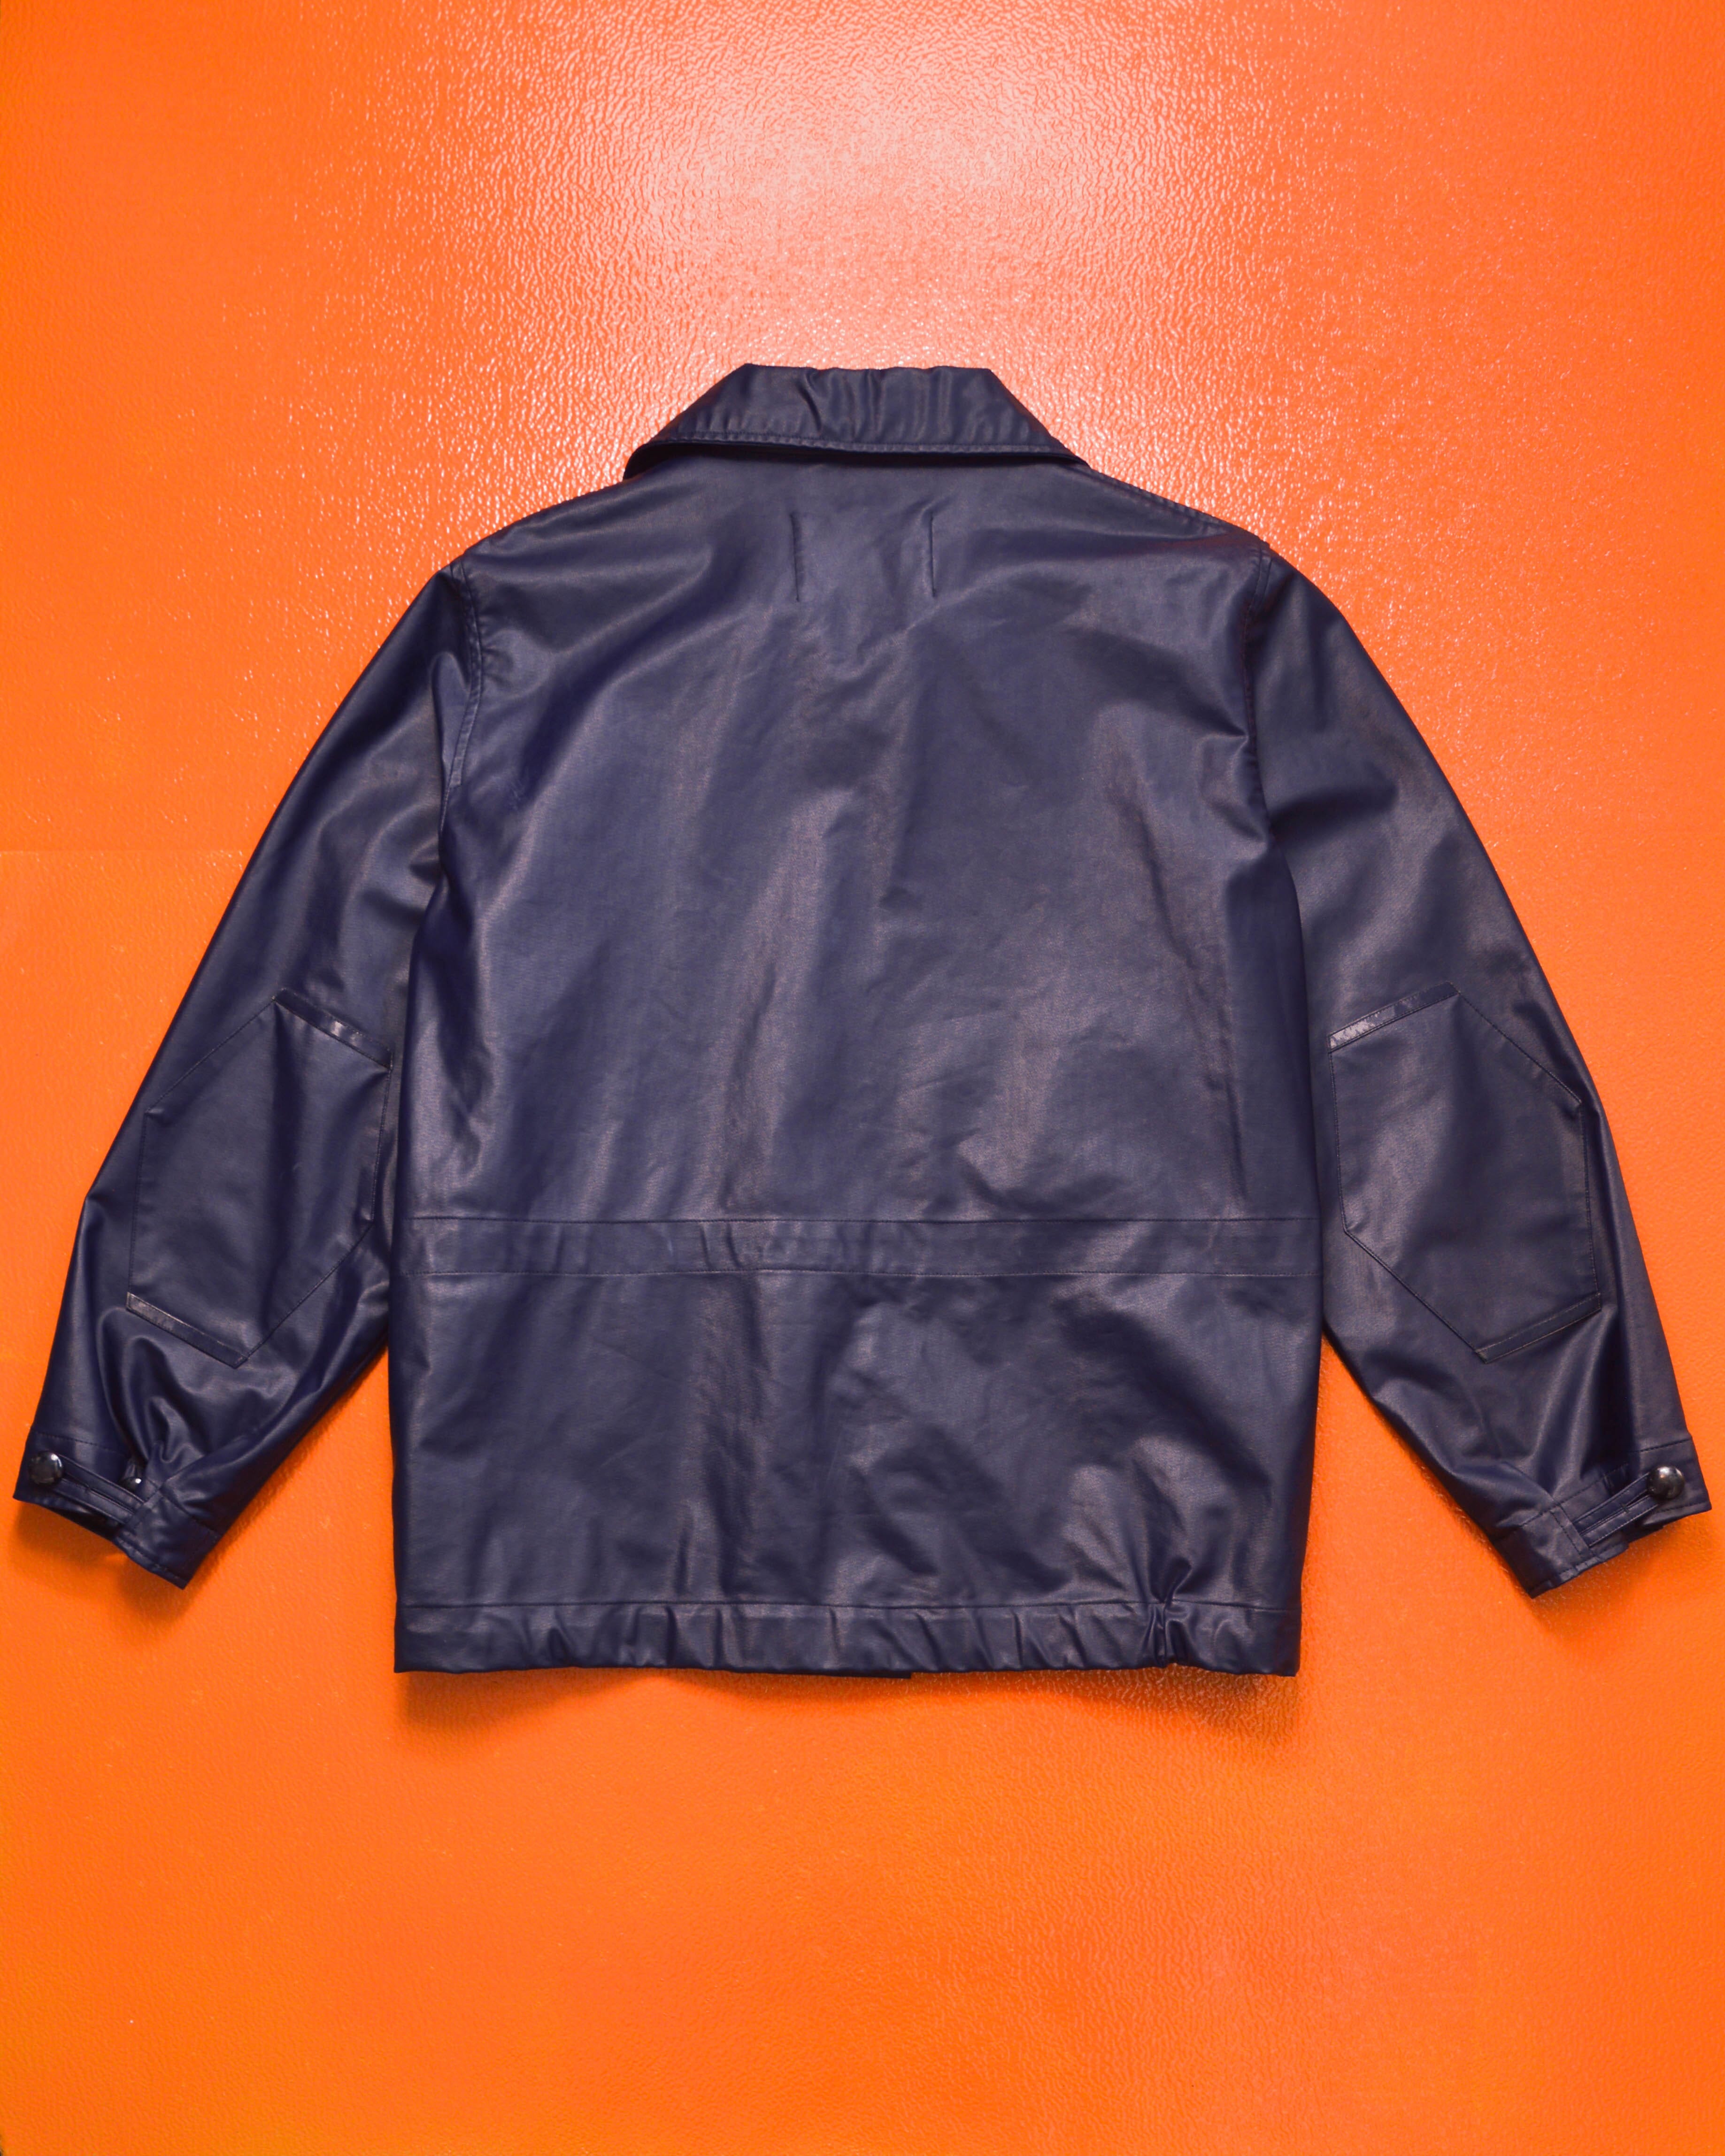 Left Hand By Massimo Osti 90s Deep Purple Button Up Work Jacket 